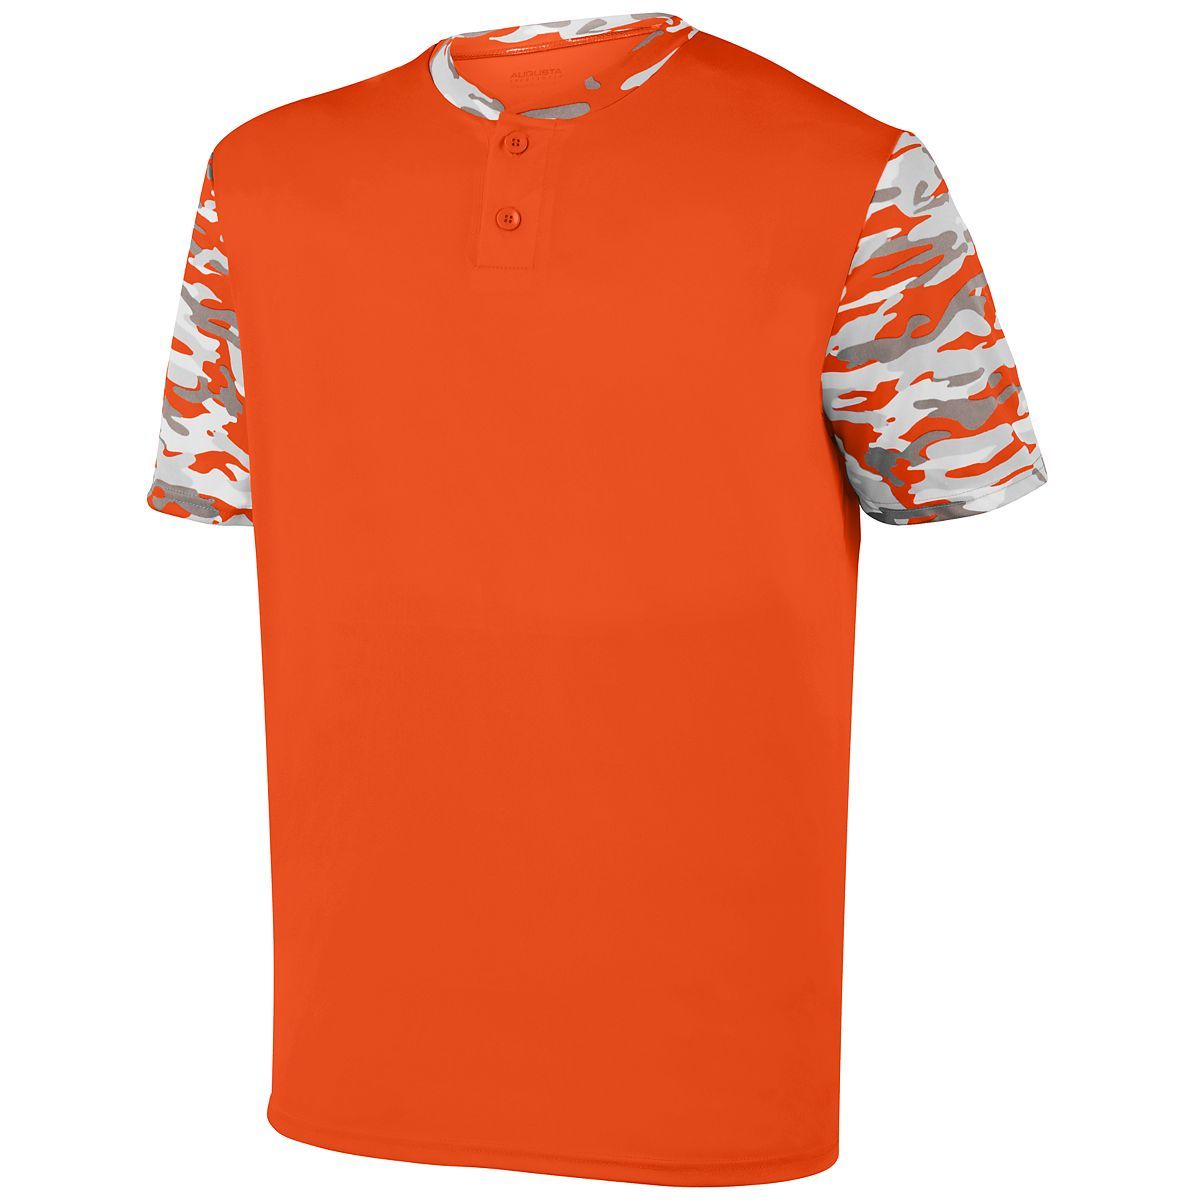 Augusta Sportswear Youth Pop Fly Jersey in Orange/Orange Mod  -Part of the Youth, Youth-Jersey, Augusta-Products, Baseball, Shirts, All-Sports, All-Sports-1 product lines at KanaleyCreations.com